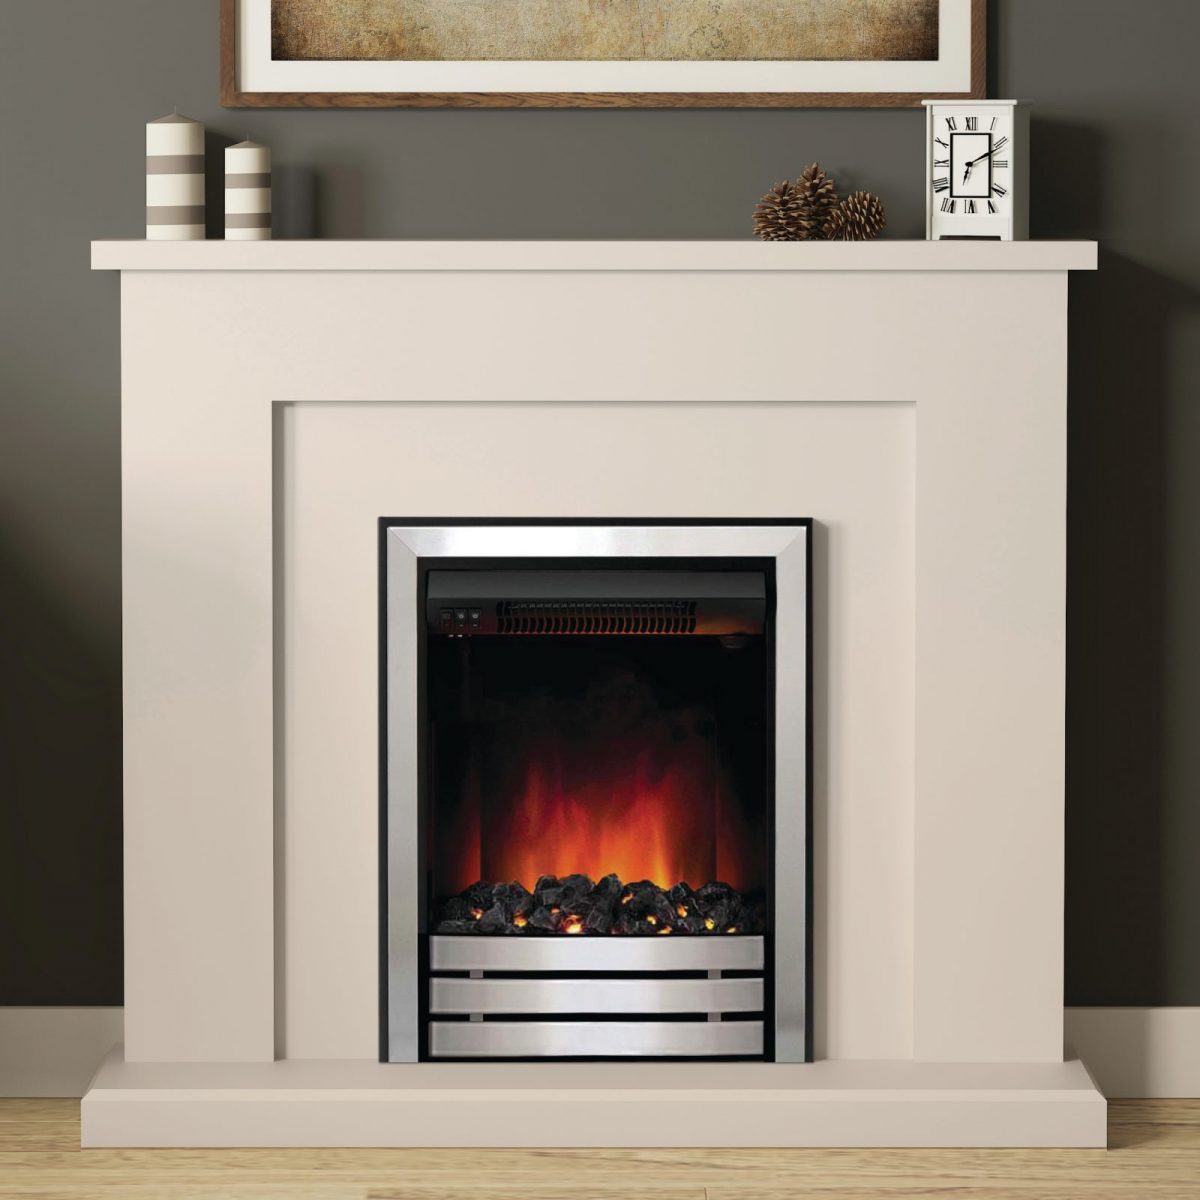 42″ Marden fireplace in Cashmere painted finish with Chrome Finish Electric Fire